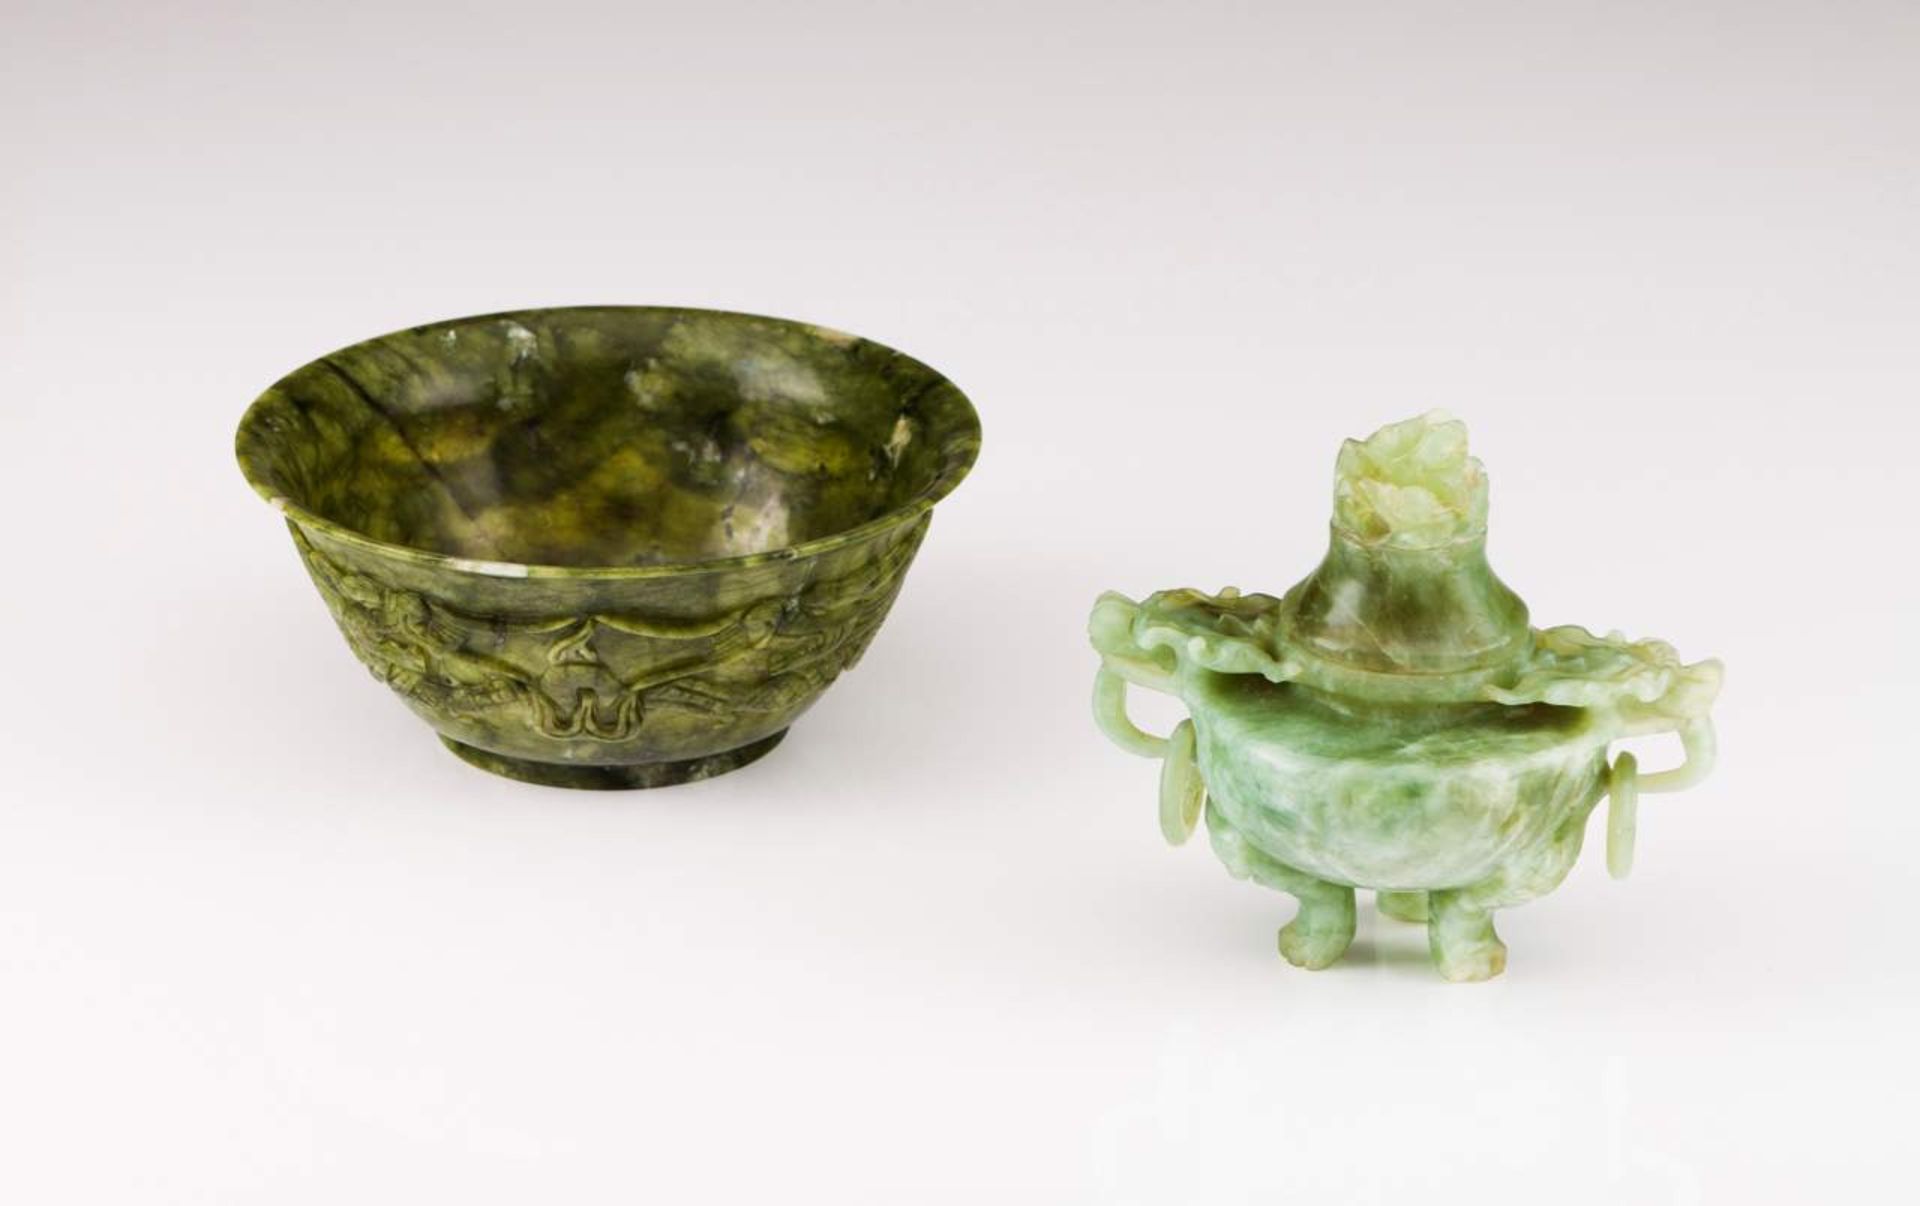 A Chinese jade bowl
Engraved and relief decoration with dragons
China, 20th century

7x18 cm